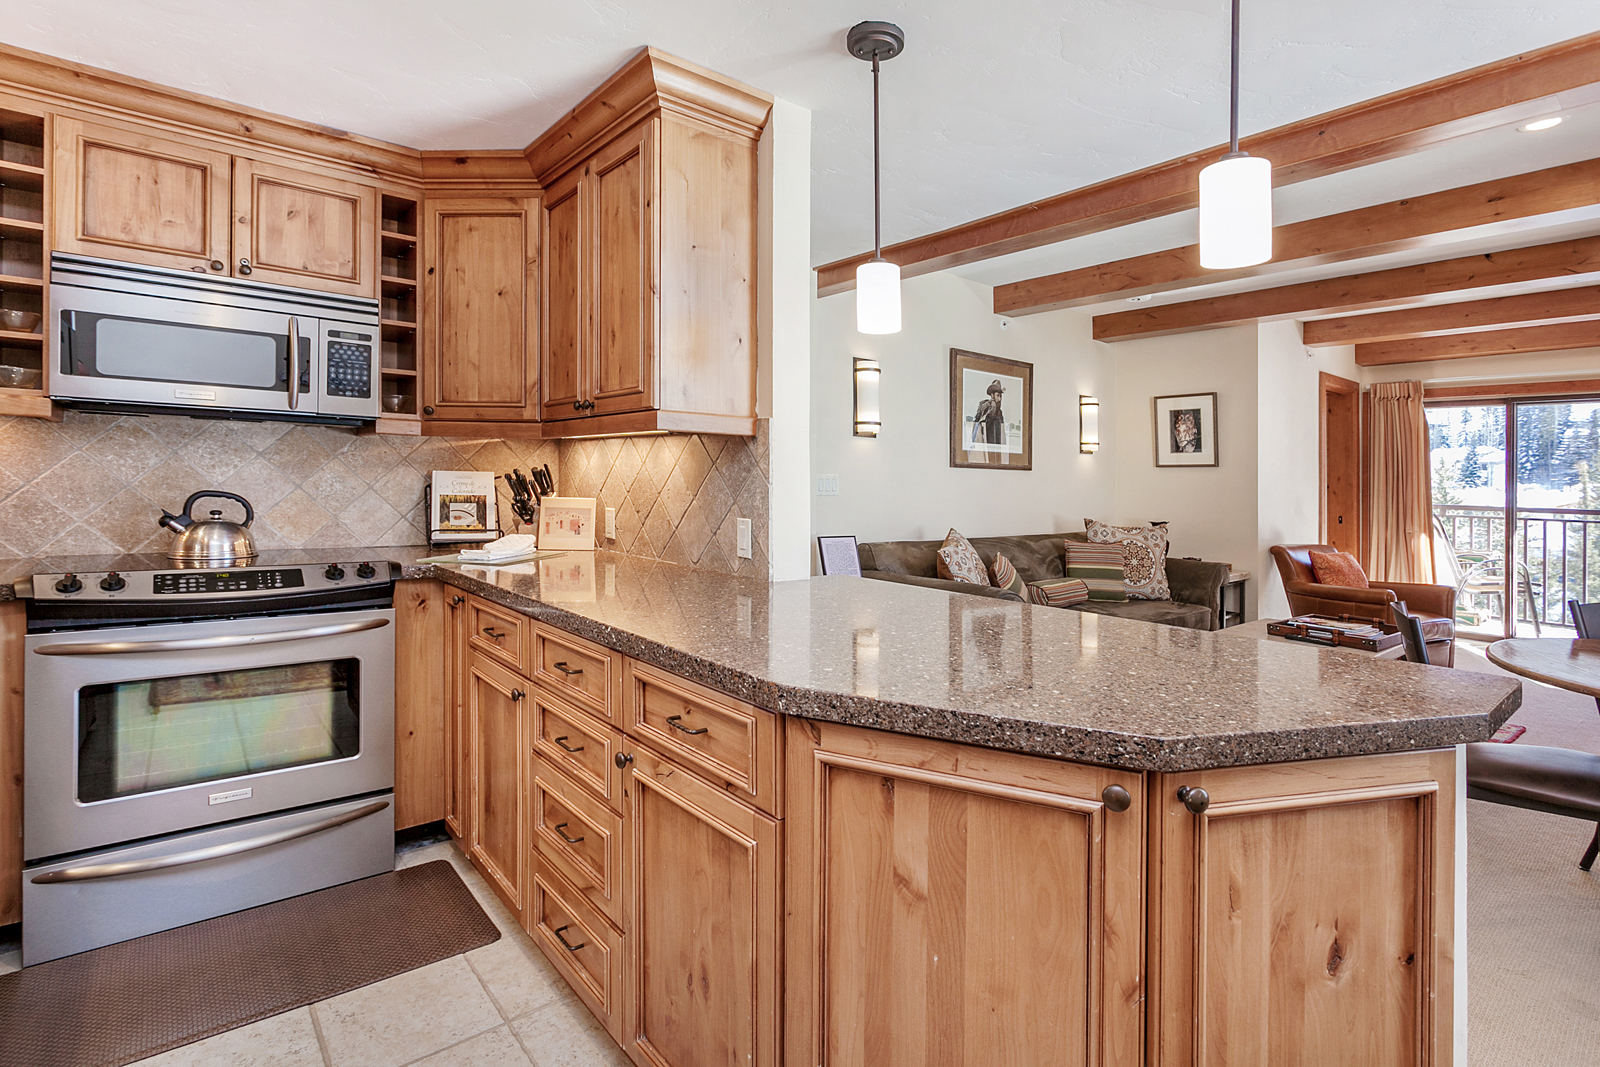 All Antlers guest suites include full kitchens and dining areas, allowing families to save by cooking and dining in the comfort of a home-like setting.